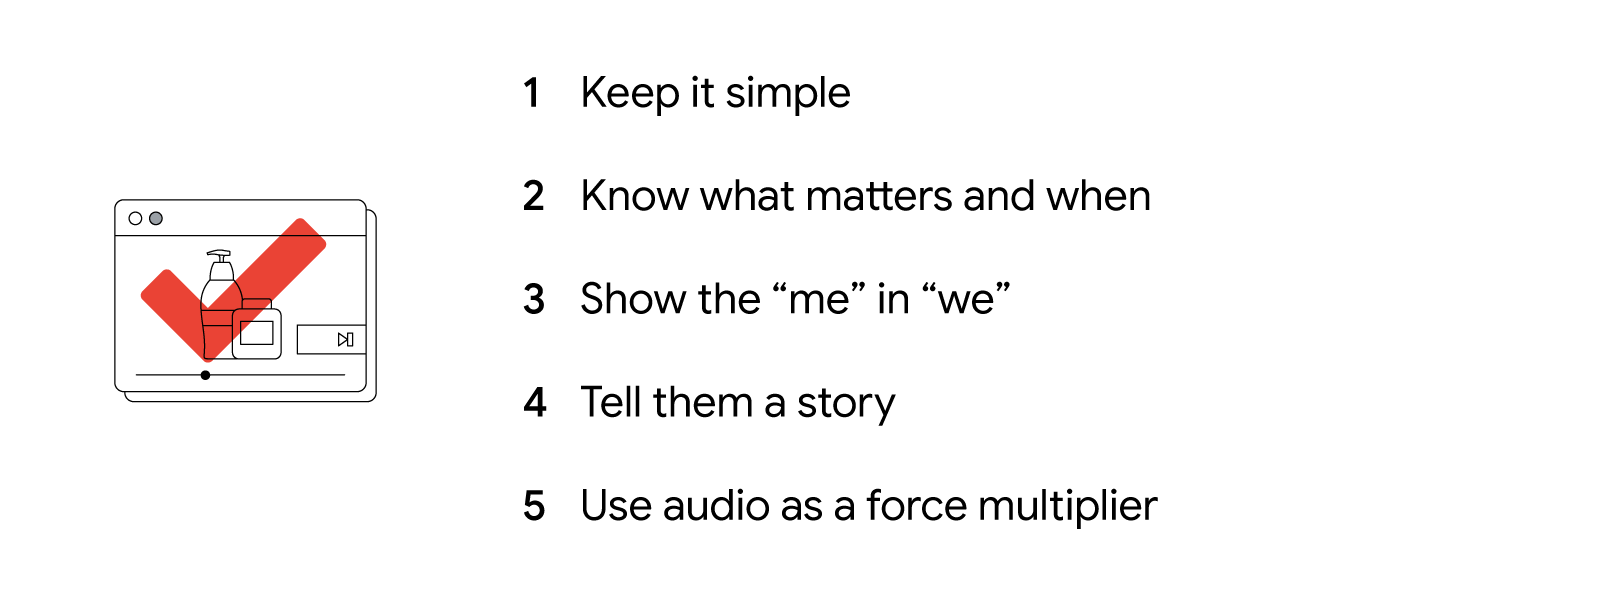 5 creative insights that resonate with viewers: 1. Keep it simple. 2. Know what matters and when. 3. Show the “me” in “we.” 4. Tell them a story. 5. Use audio as a force multiplier.